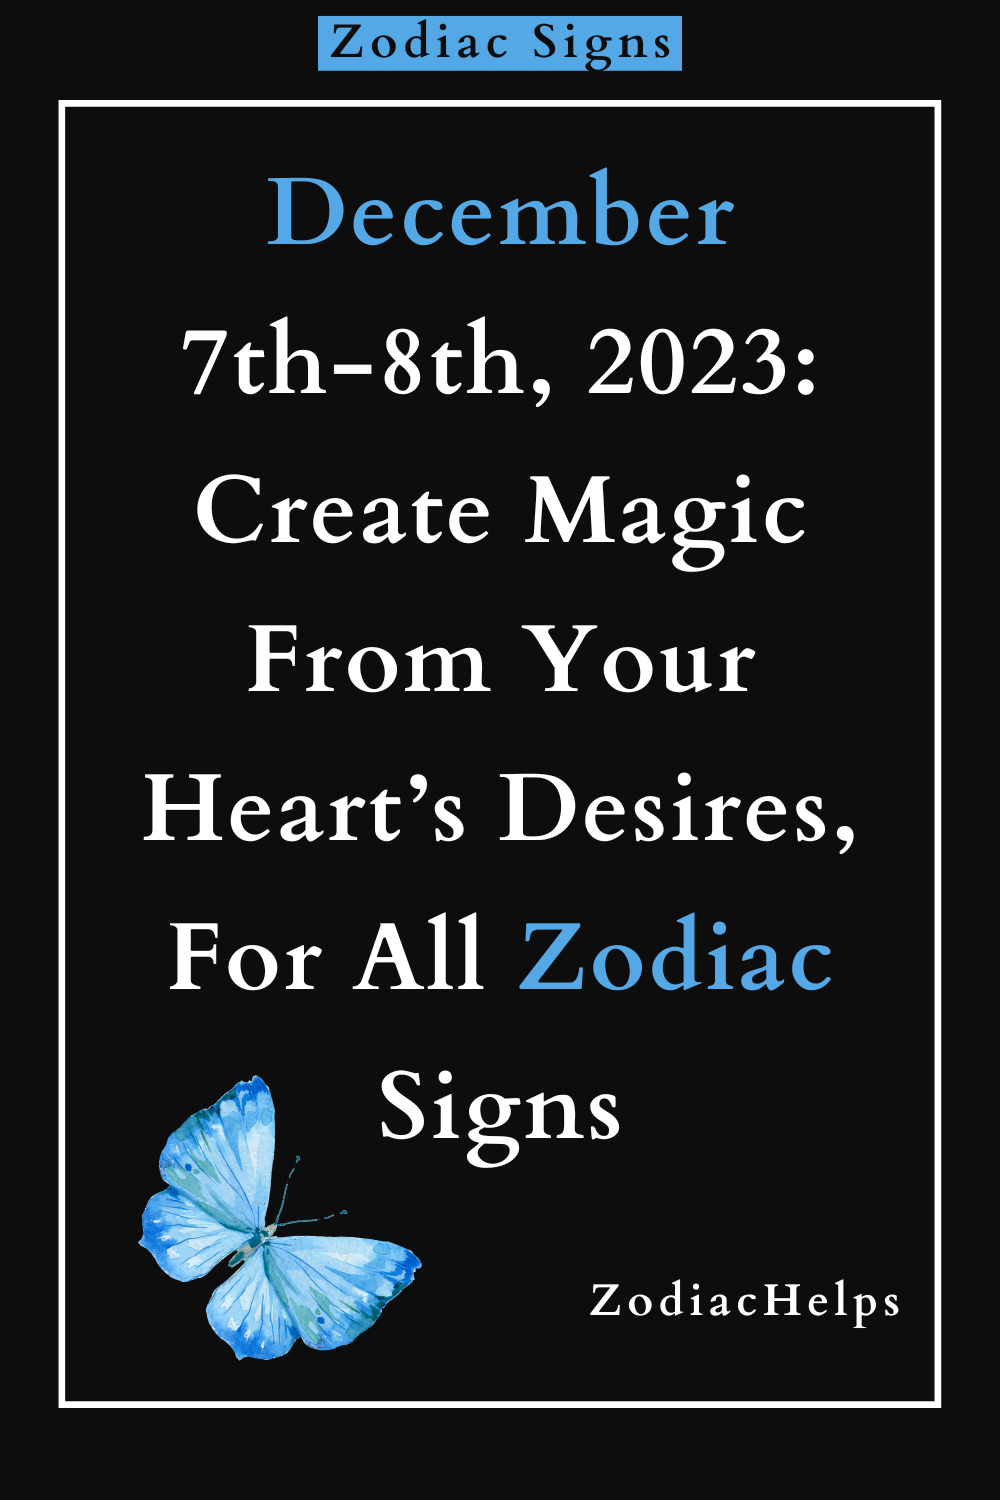 December 7th-8th, 2023 Create Magic From Your Heart’s Desires, For All Zodiac Signs